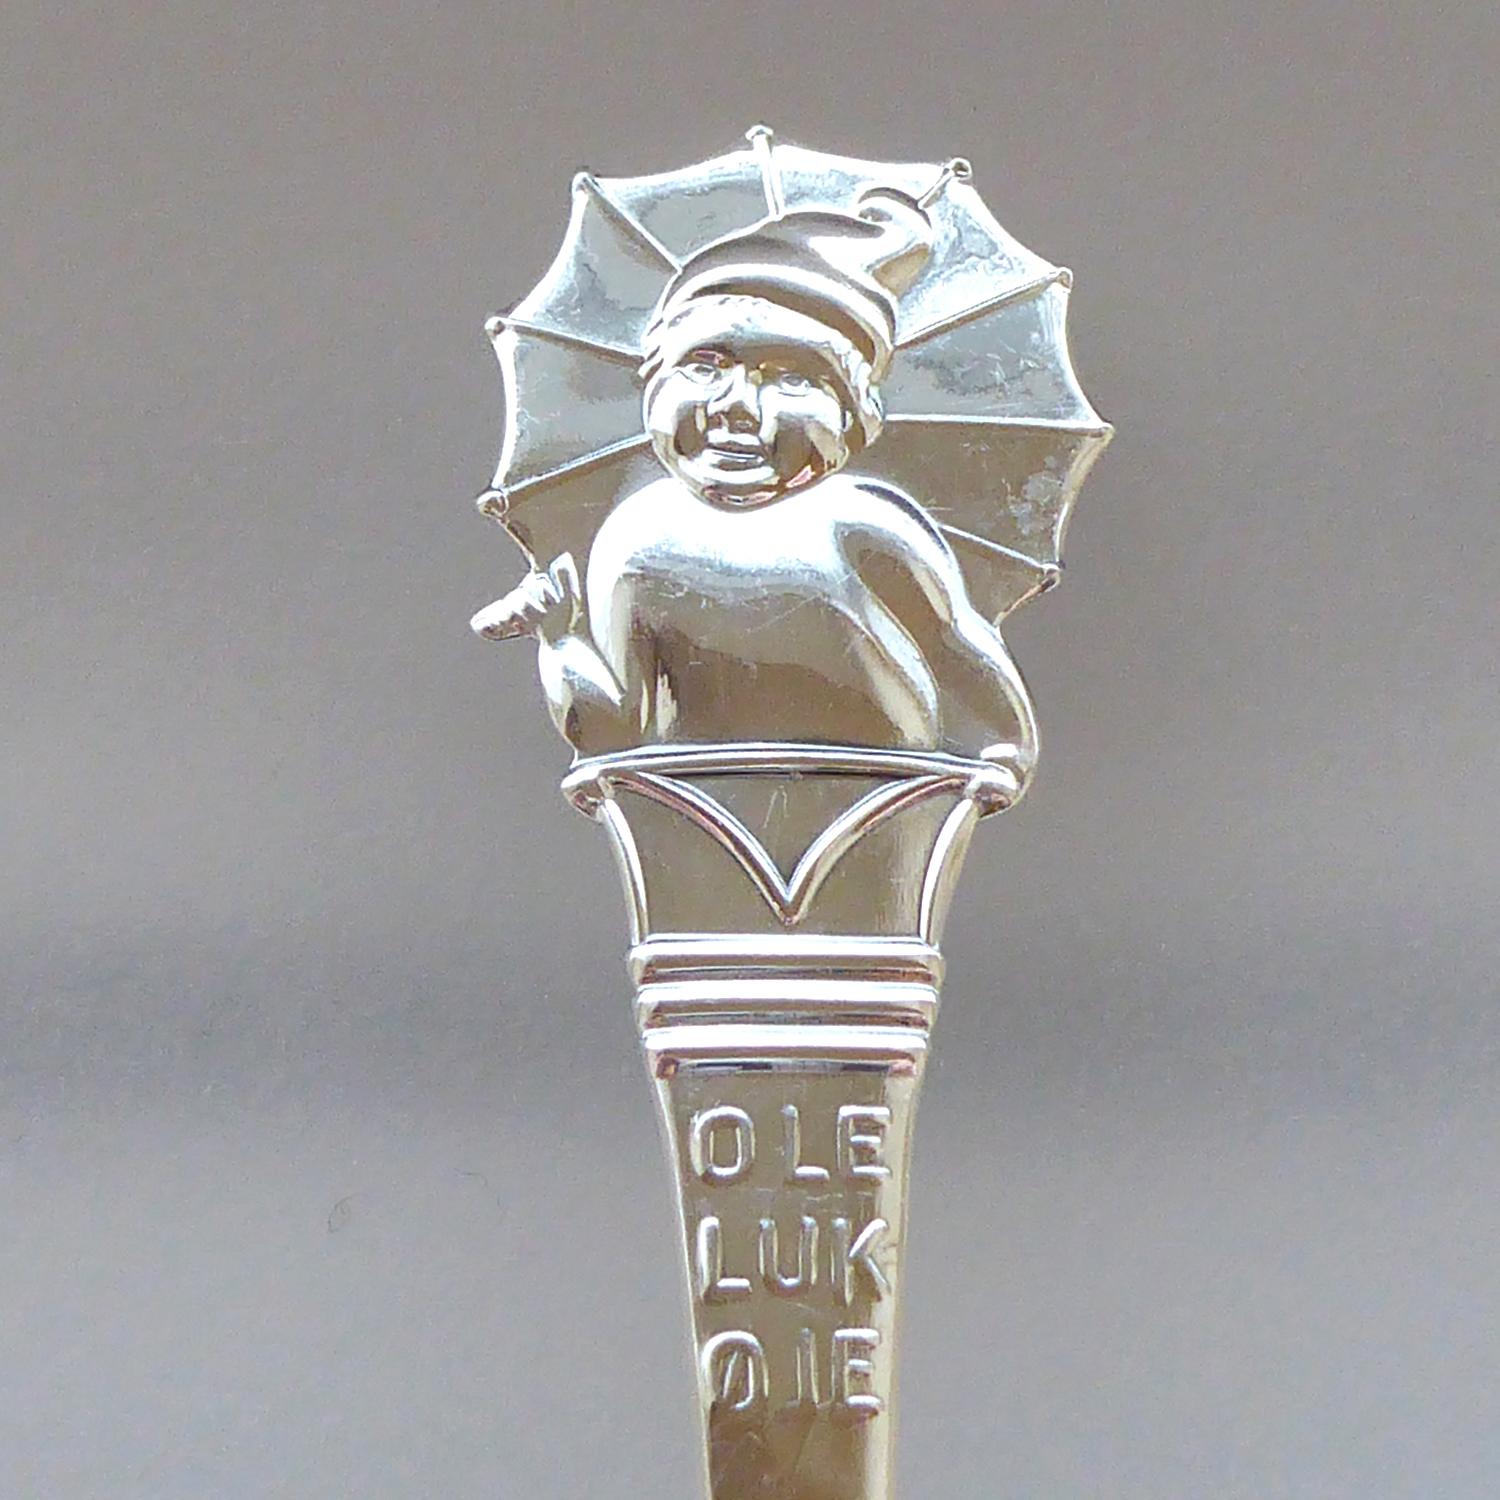 A delightful children's silver spoon featuring the Scandinavian fairytale character, Ole Lukoje, which translates as 